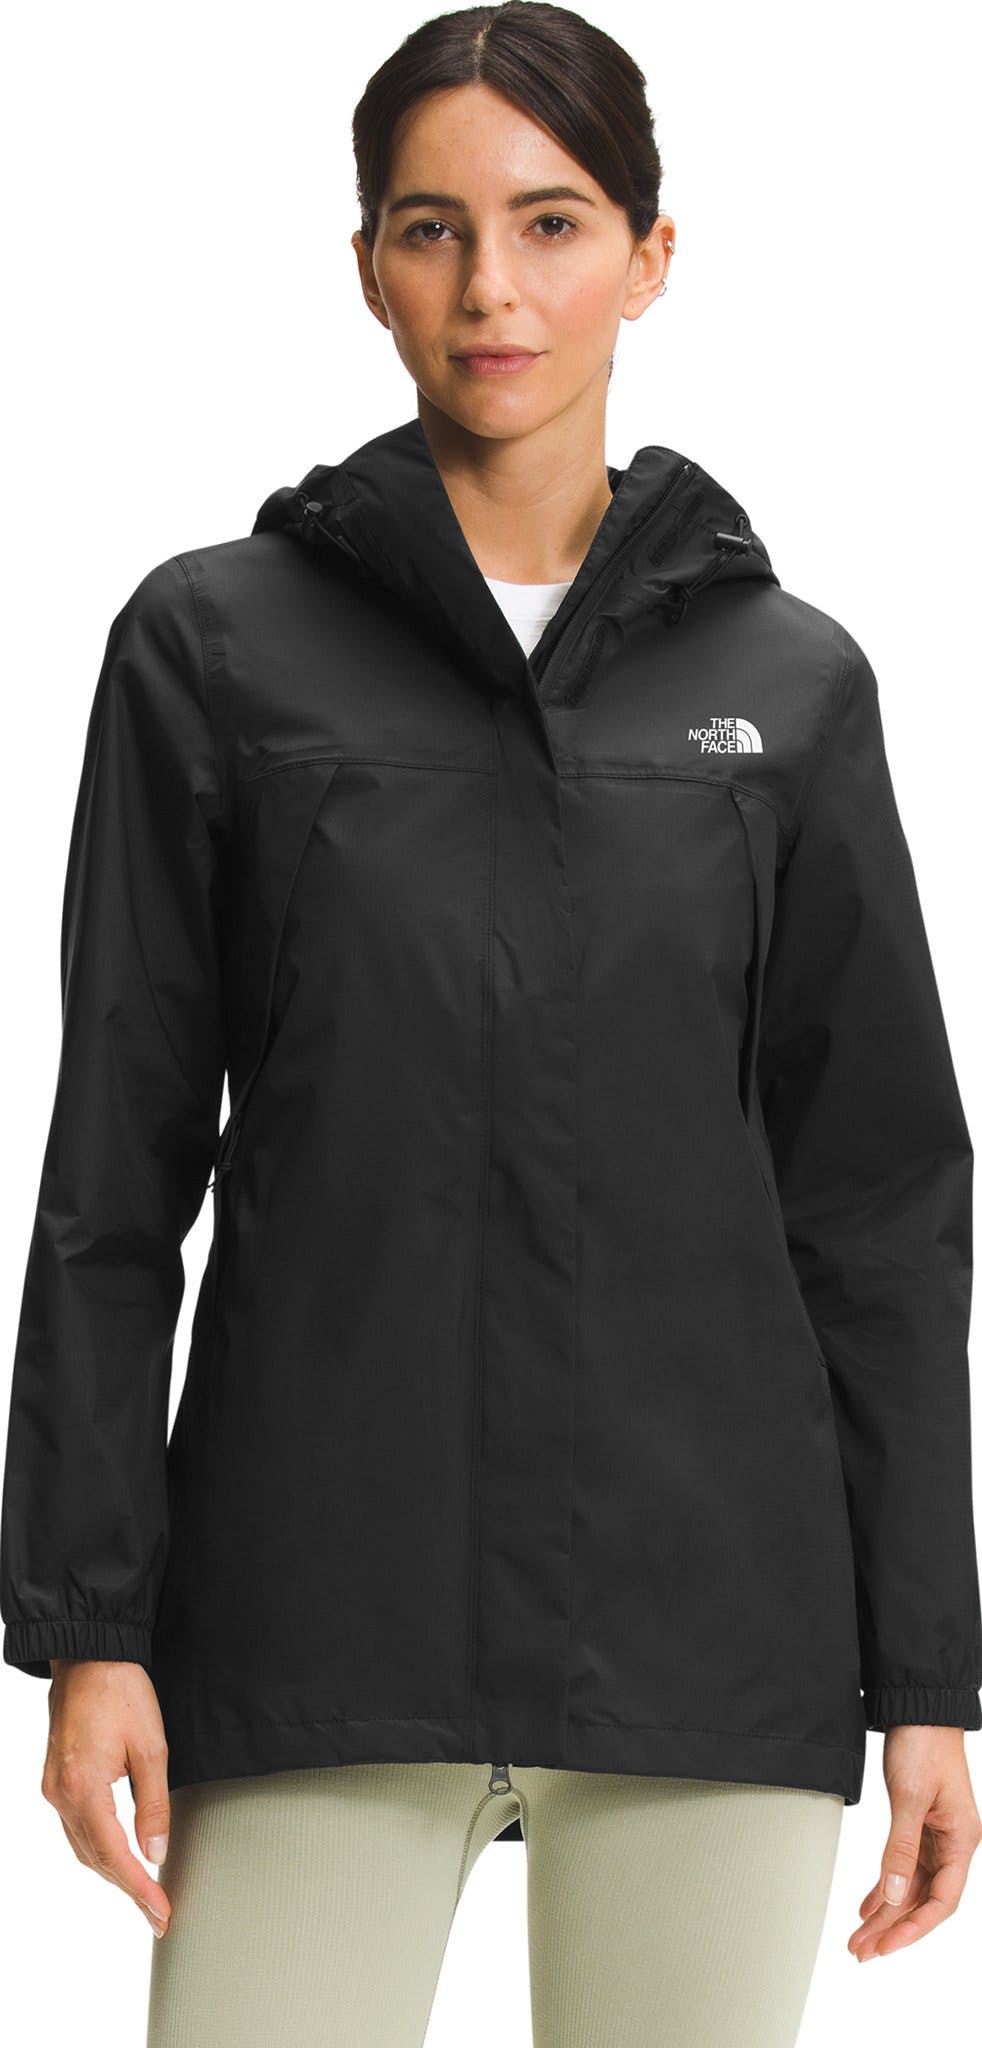 Product image for Antora Parka - Women's